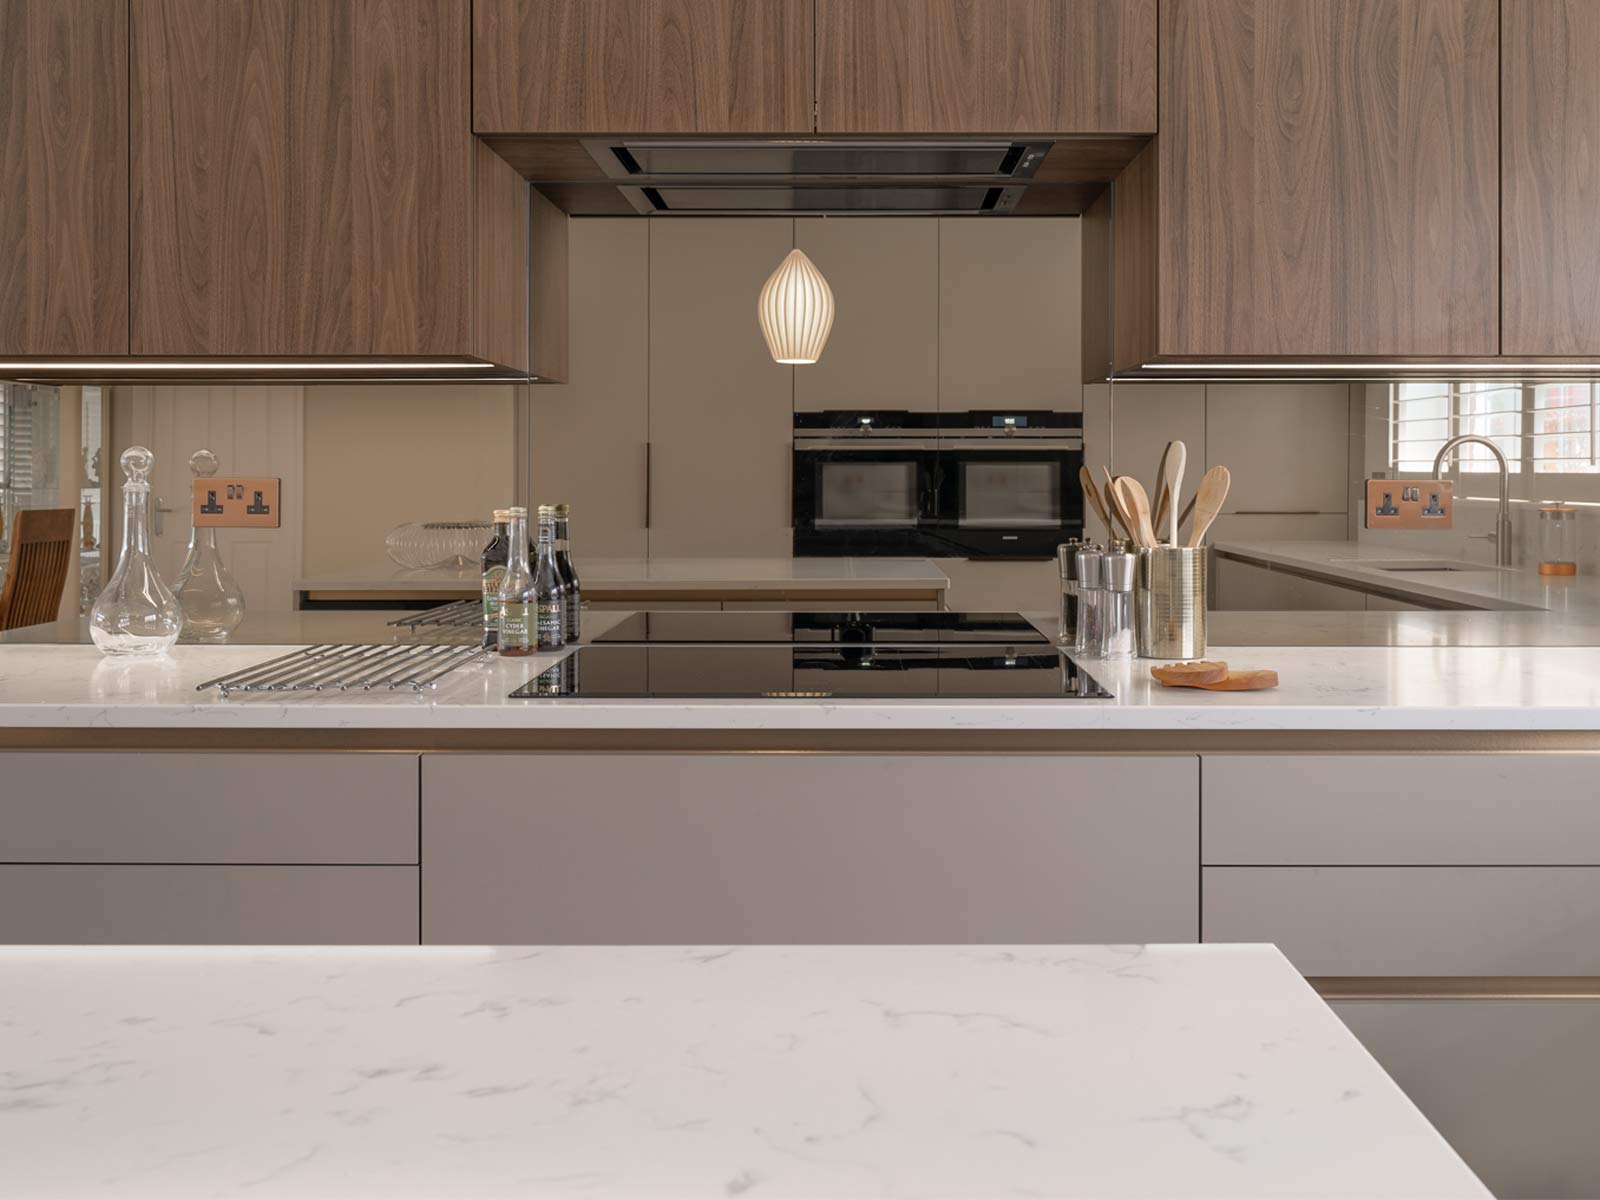 A cashmere kitchen with handleless grey cabinet doors and a kitchen island